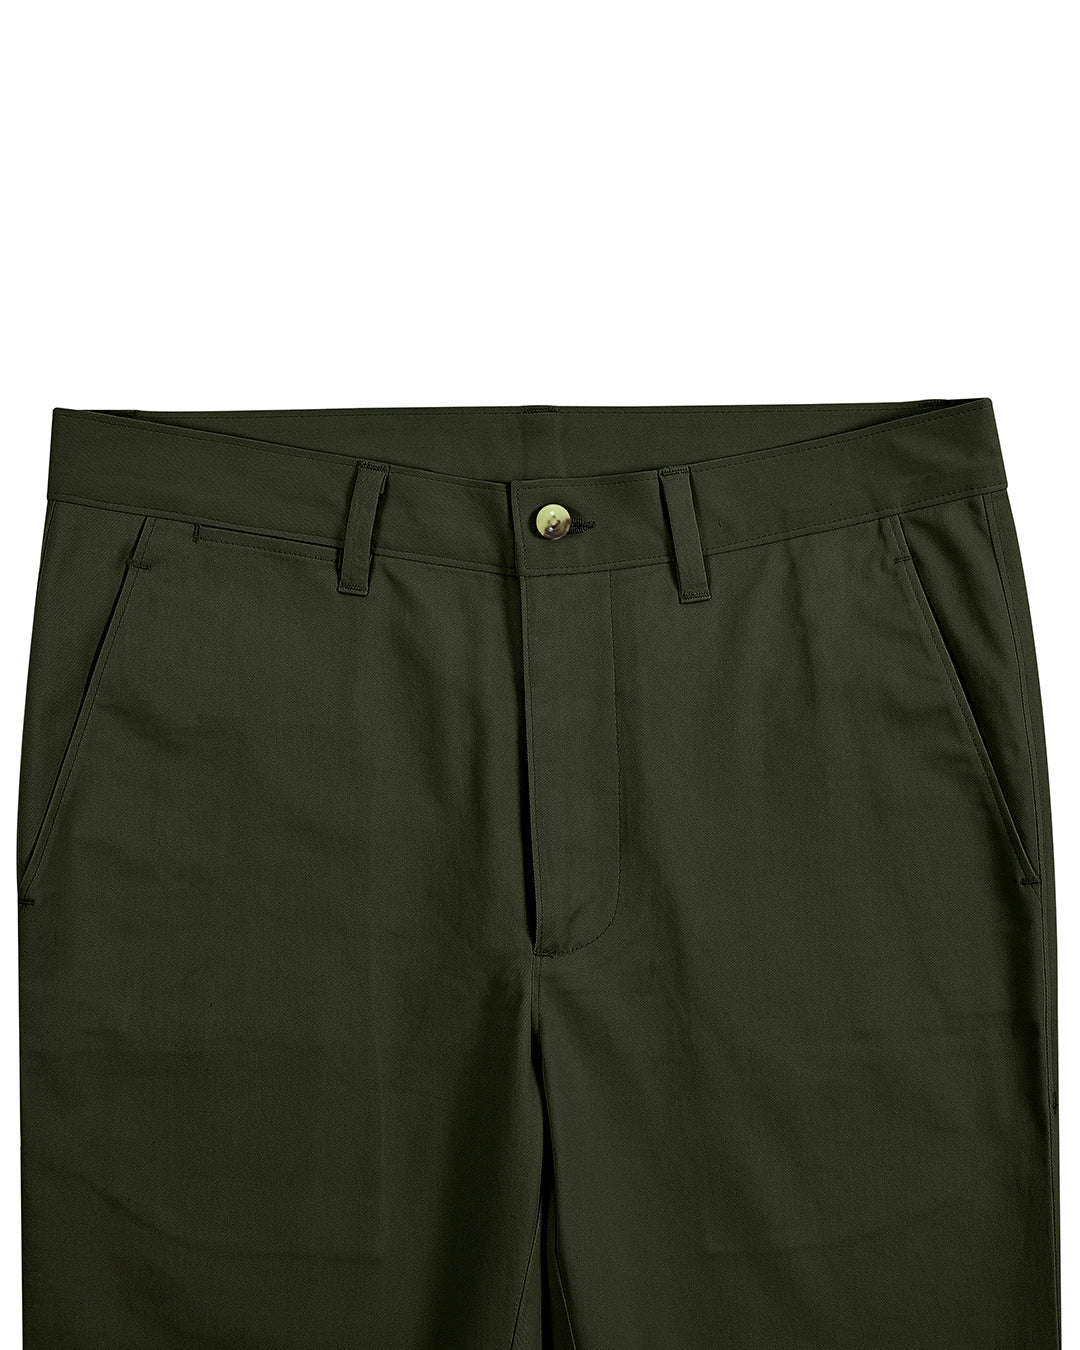 Front view of custom Genoa Chino pants for men by Luxire in olive green